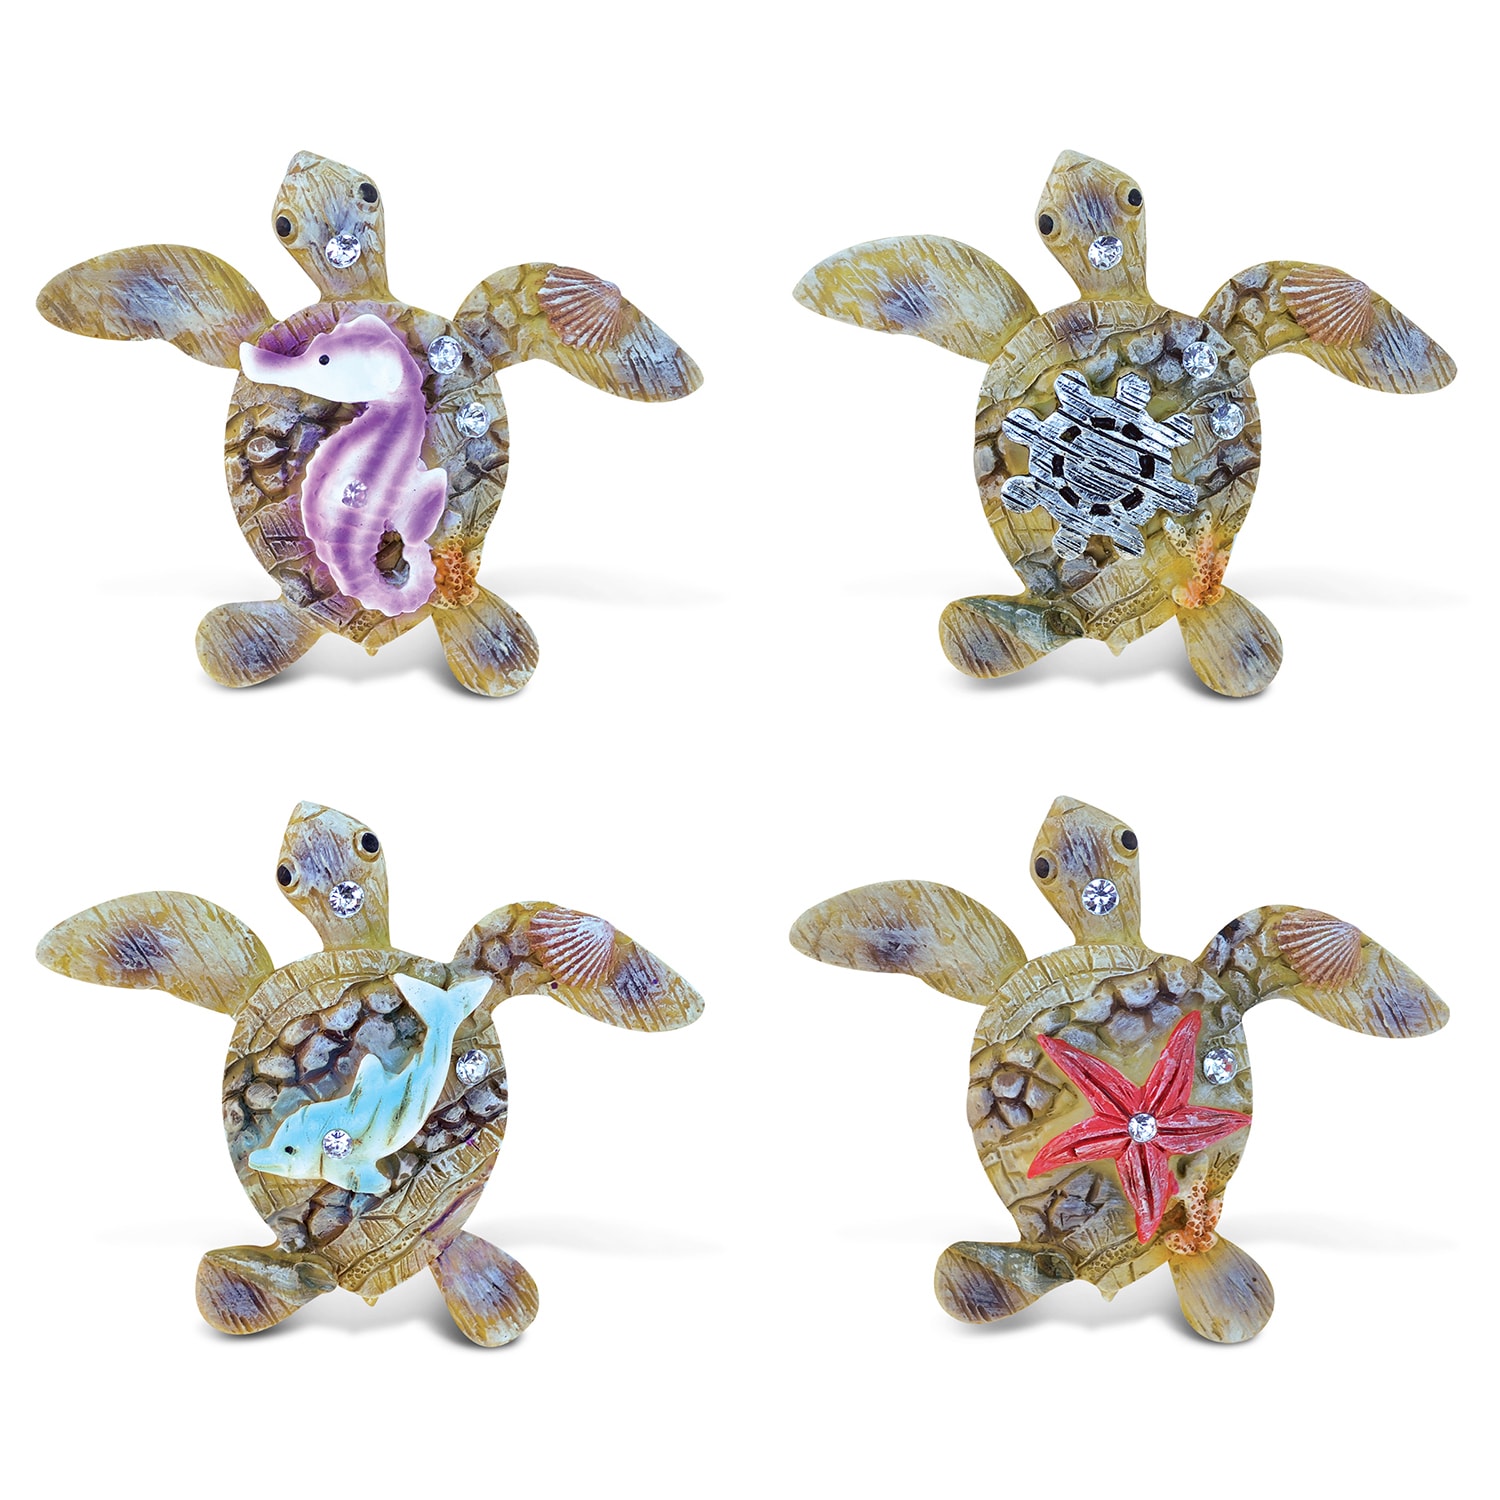 Puzzled Sea Turtle Rockstone Resin Refrigerator Magnet (Pack of 4)